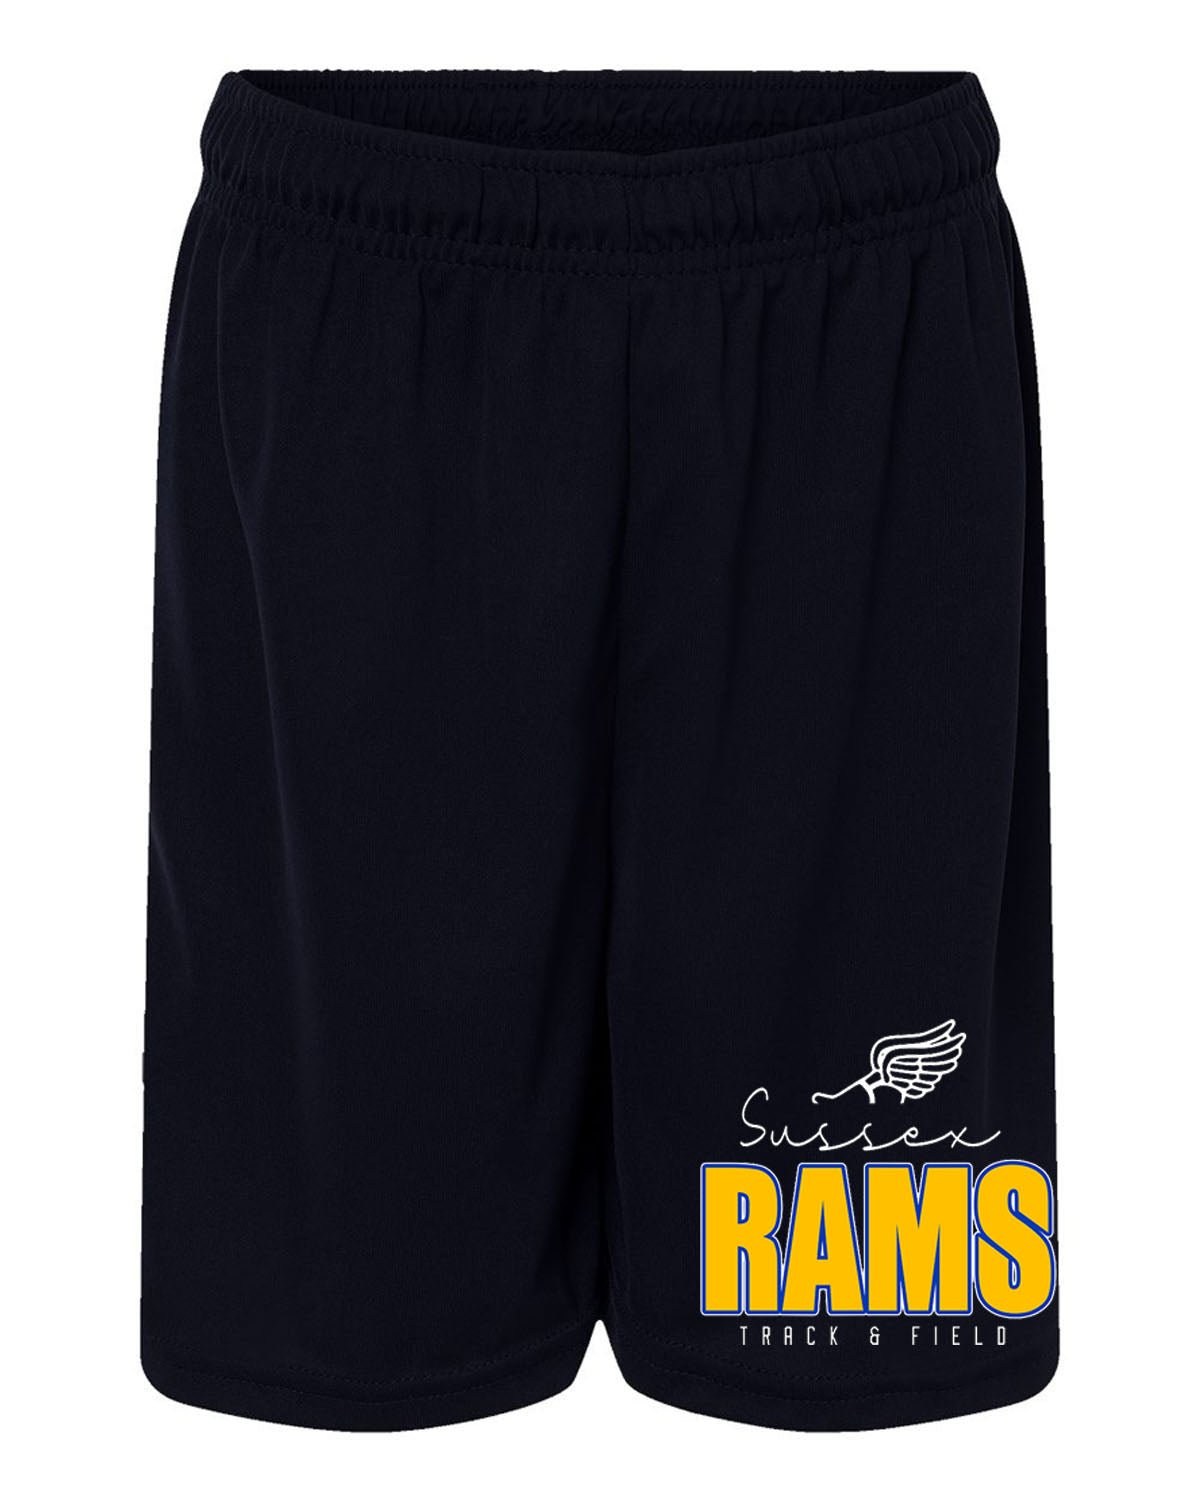 Sussex Rams Track Performance Shorts Design 4